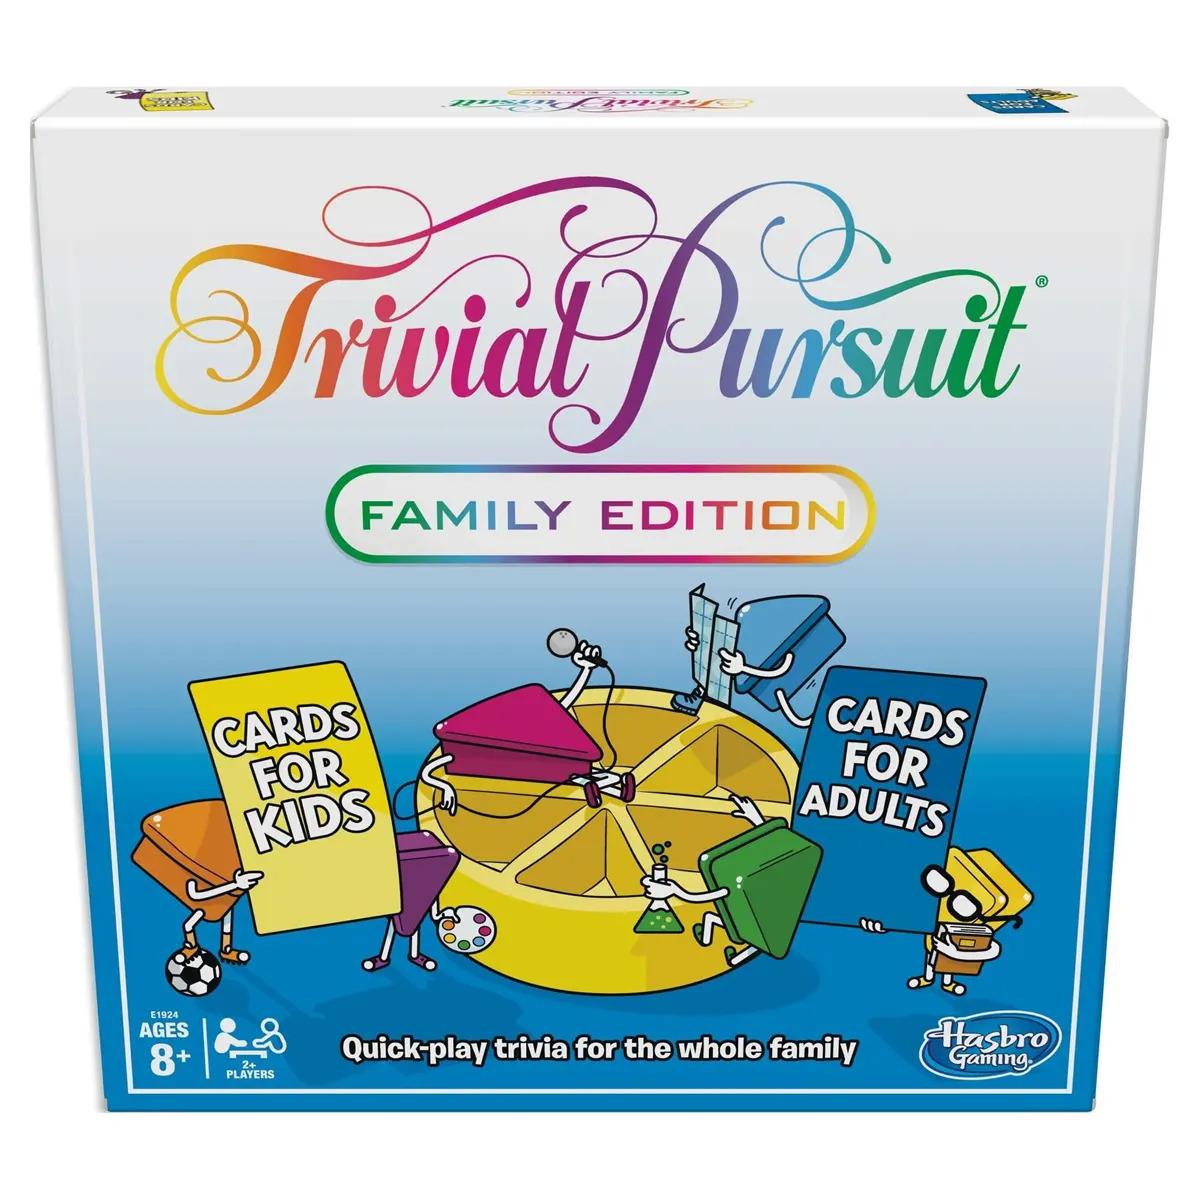 Hasbro Trivial Pursuit Family Edition Board Game for $9.97